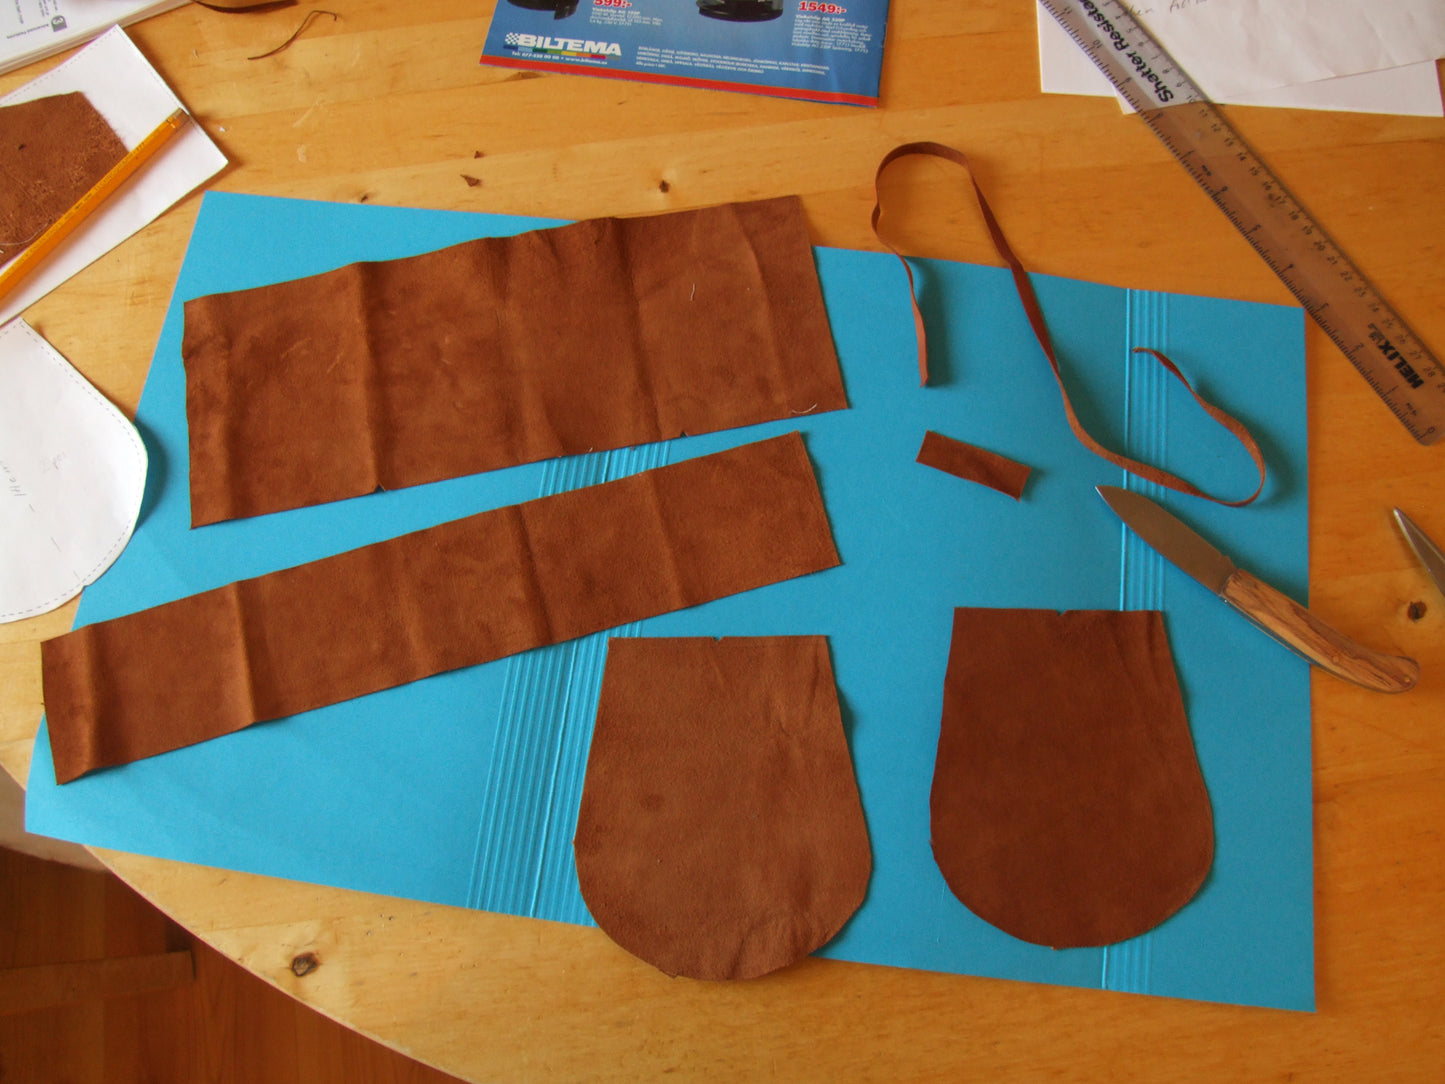 Sew Your Own Reindeer Leather Bag